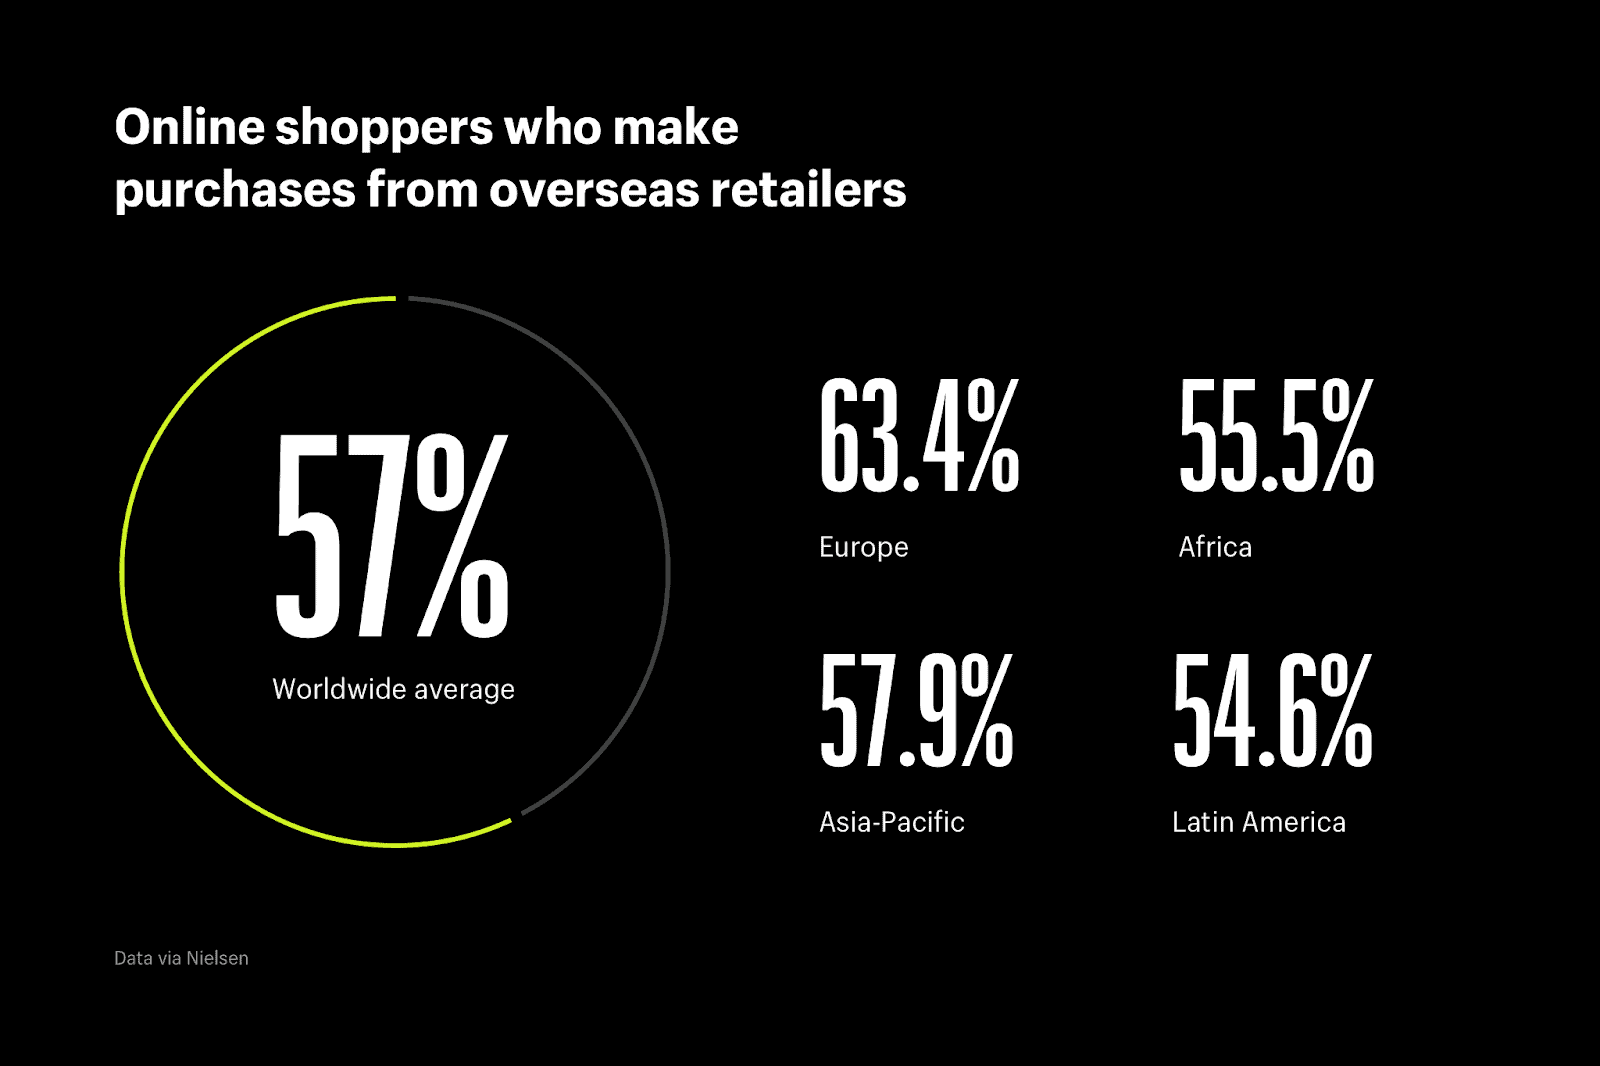 Online shoppers who make purchases from overseas retailers